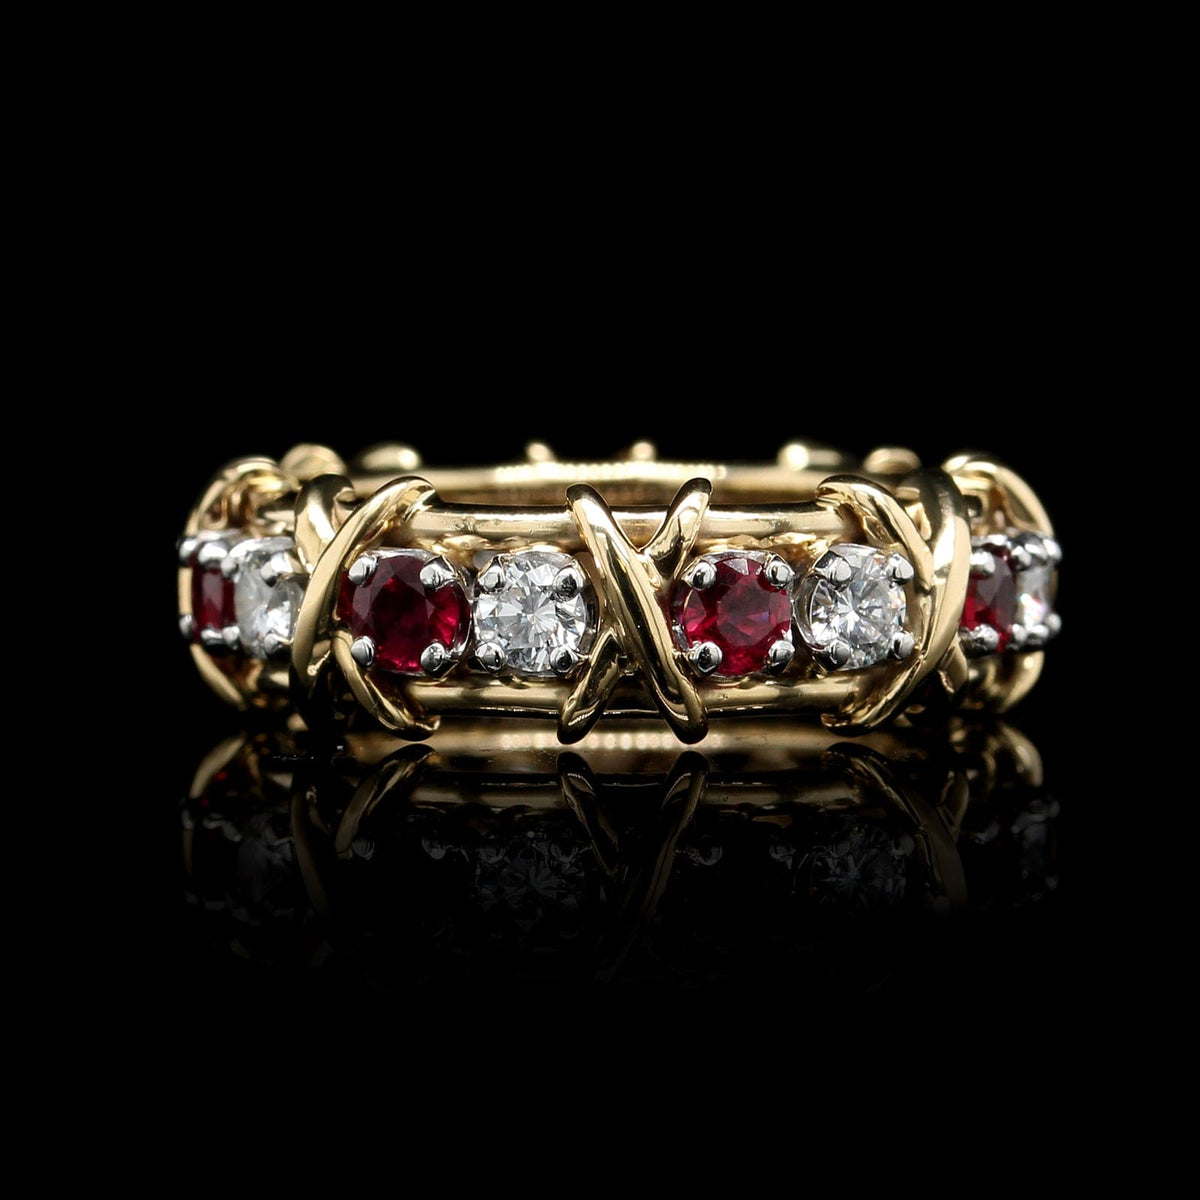 Tiffany & Co. 18K Yellow Gold and Platinum Estate Schlumberger Sixteen Stone Ruby and and Diamond Ring